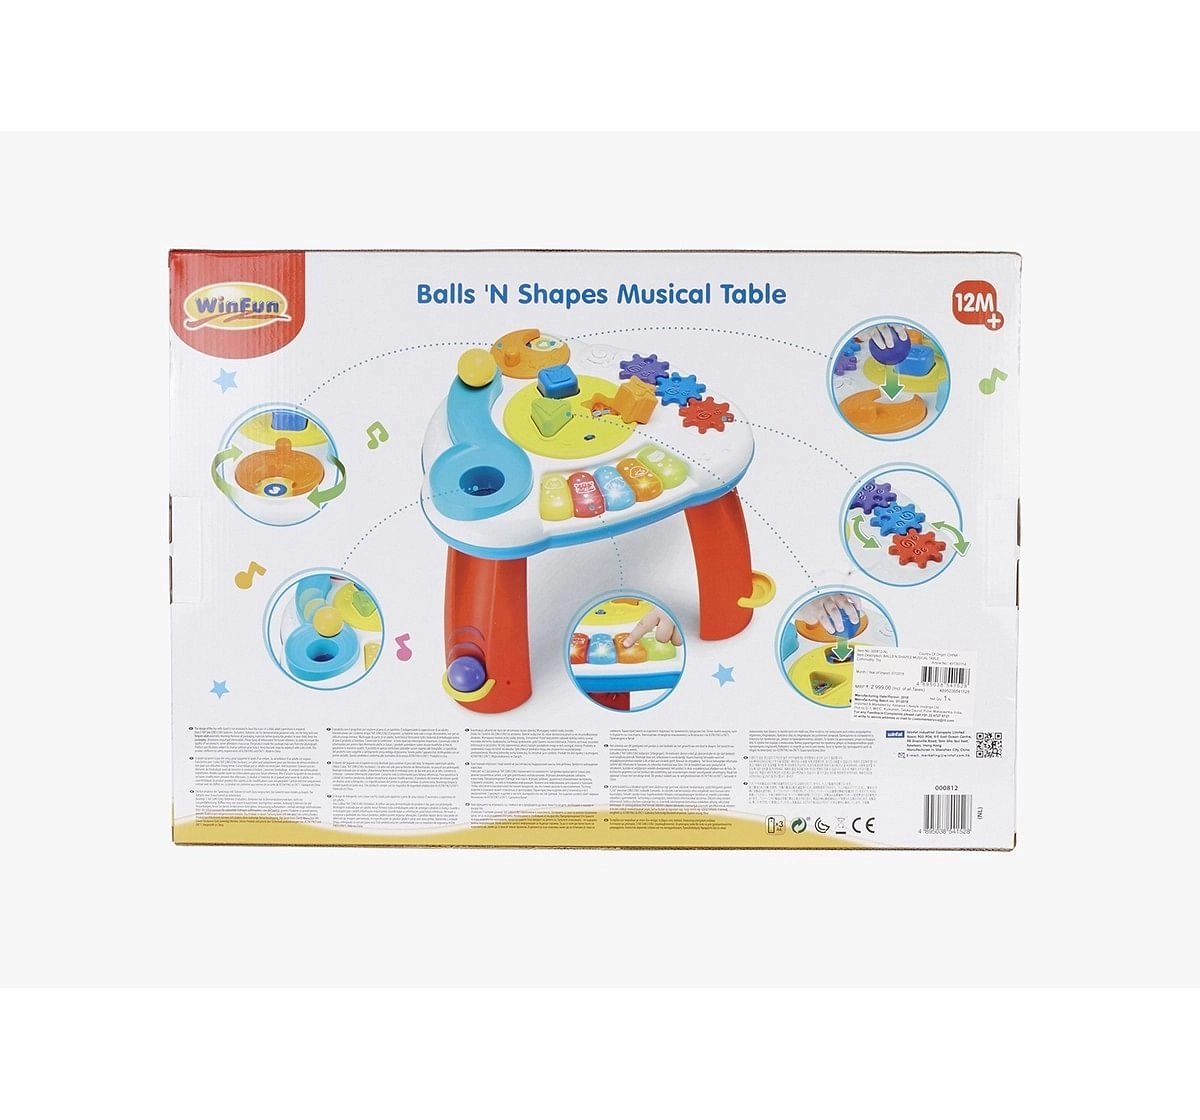 Winfun Balls 'N Shapes Musical Table Baby Gear for Kids age 12M+ 